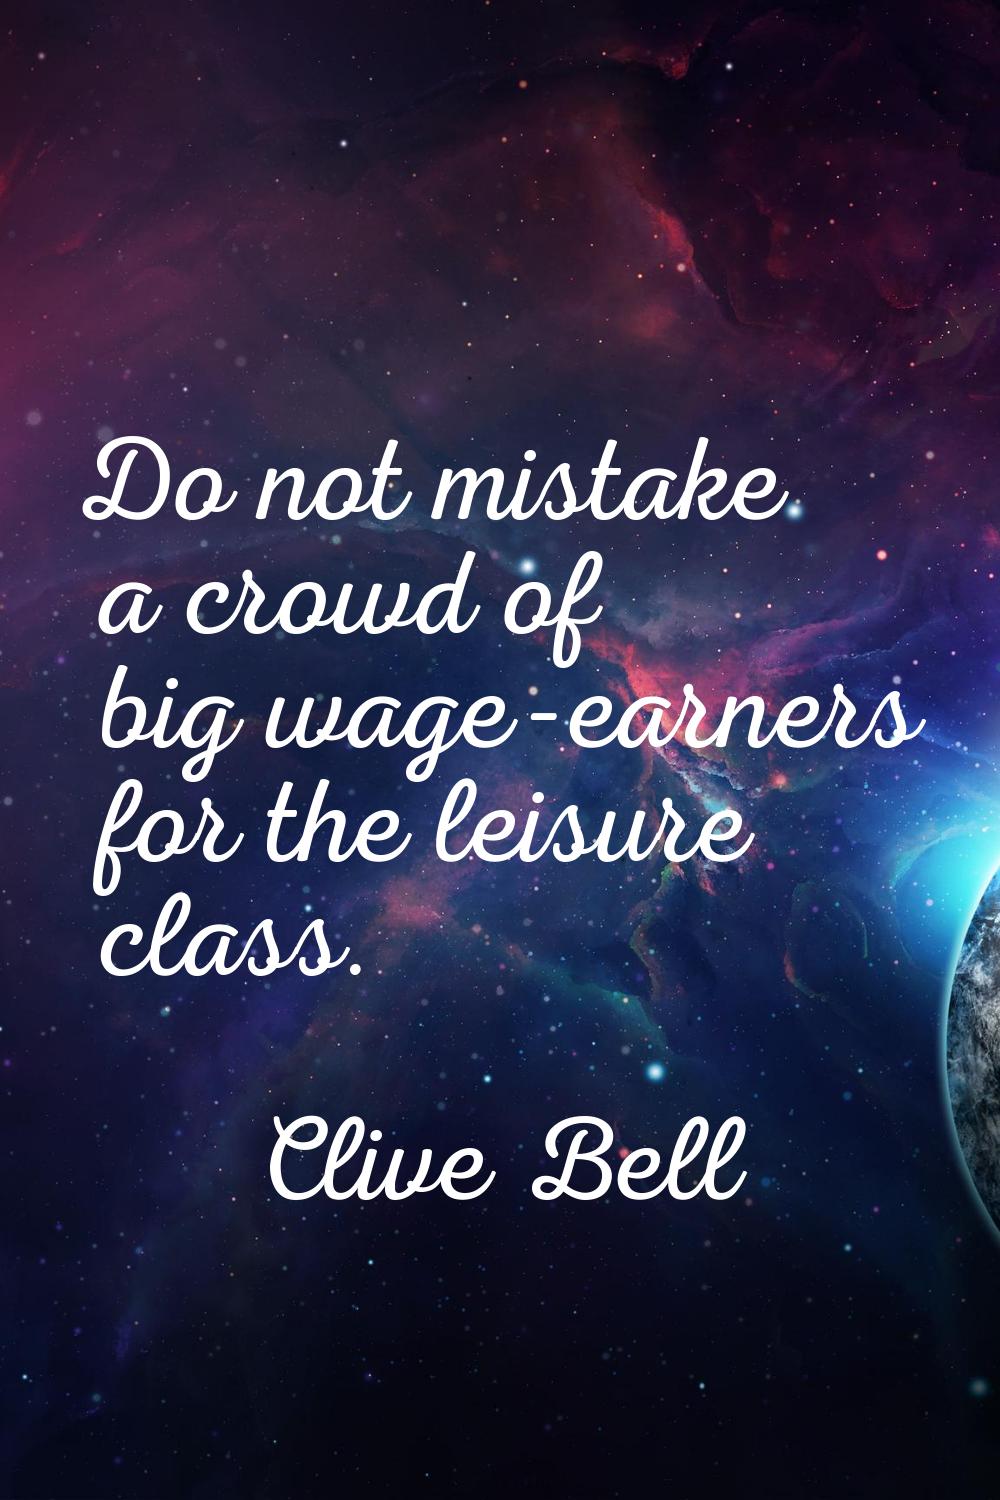 Do not mistake a crowd of big wage-earners for the leisure class.